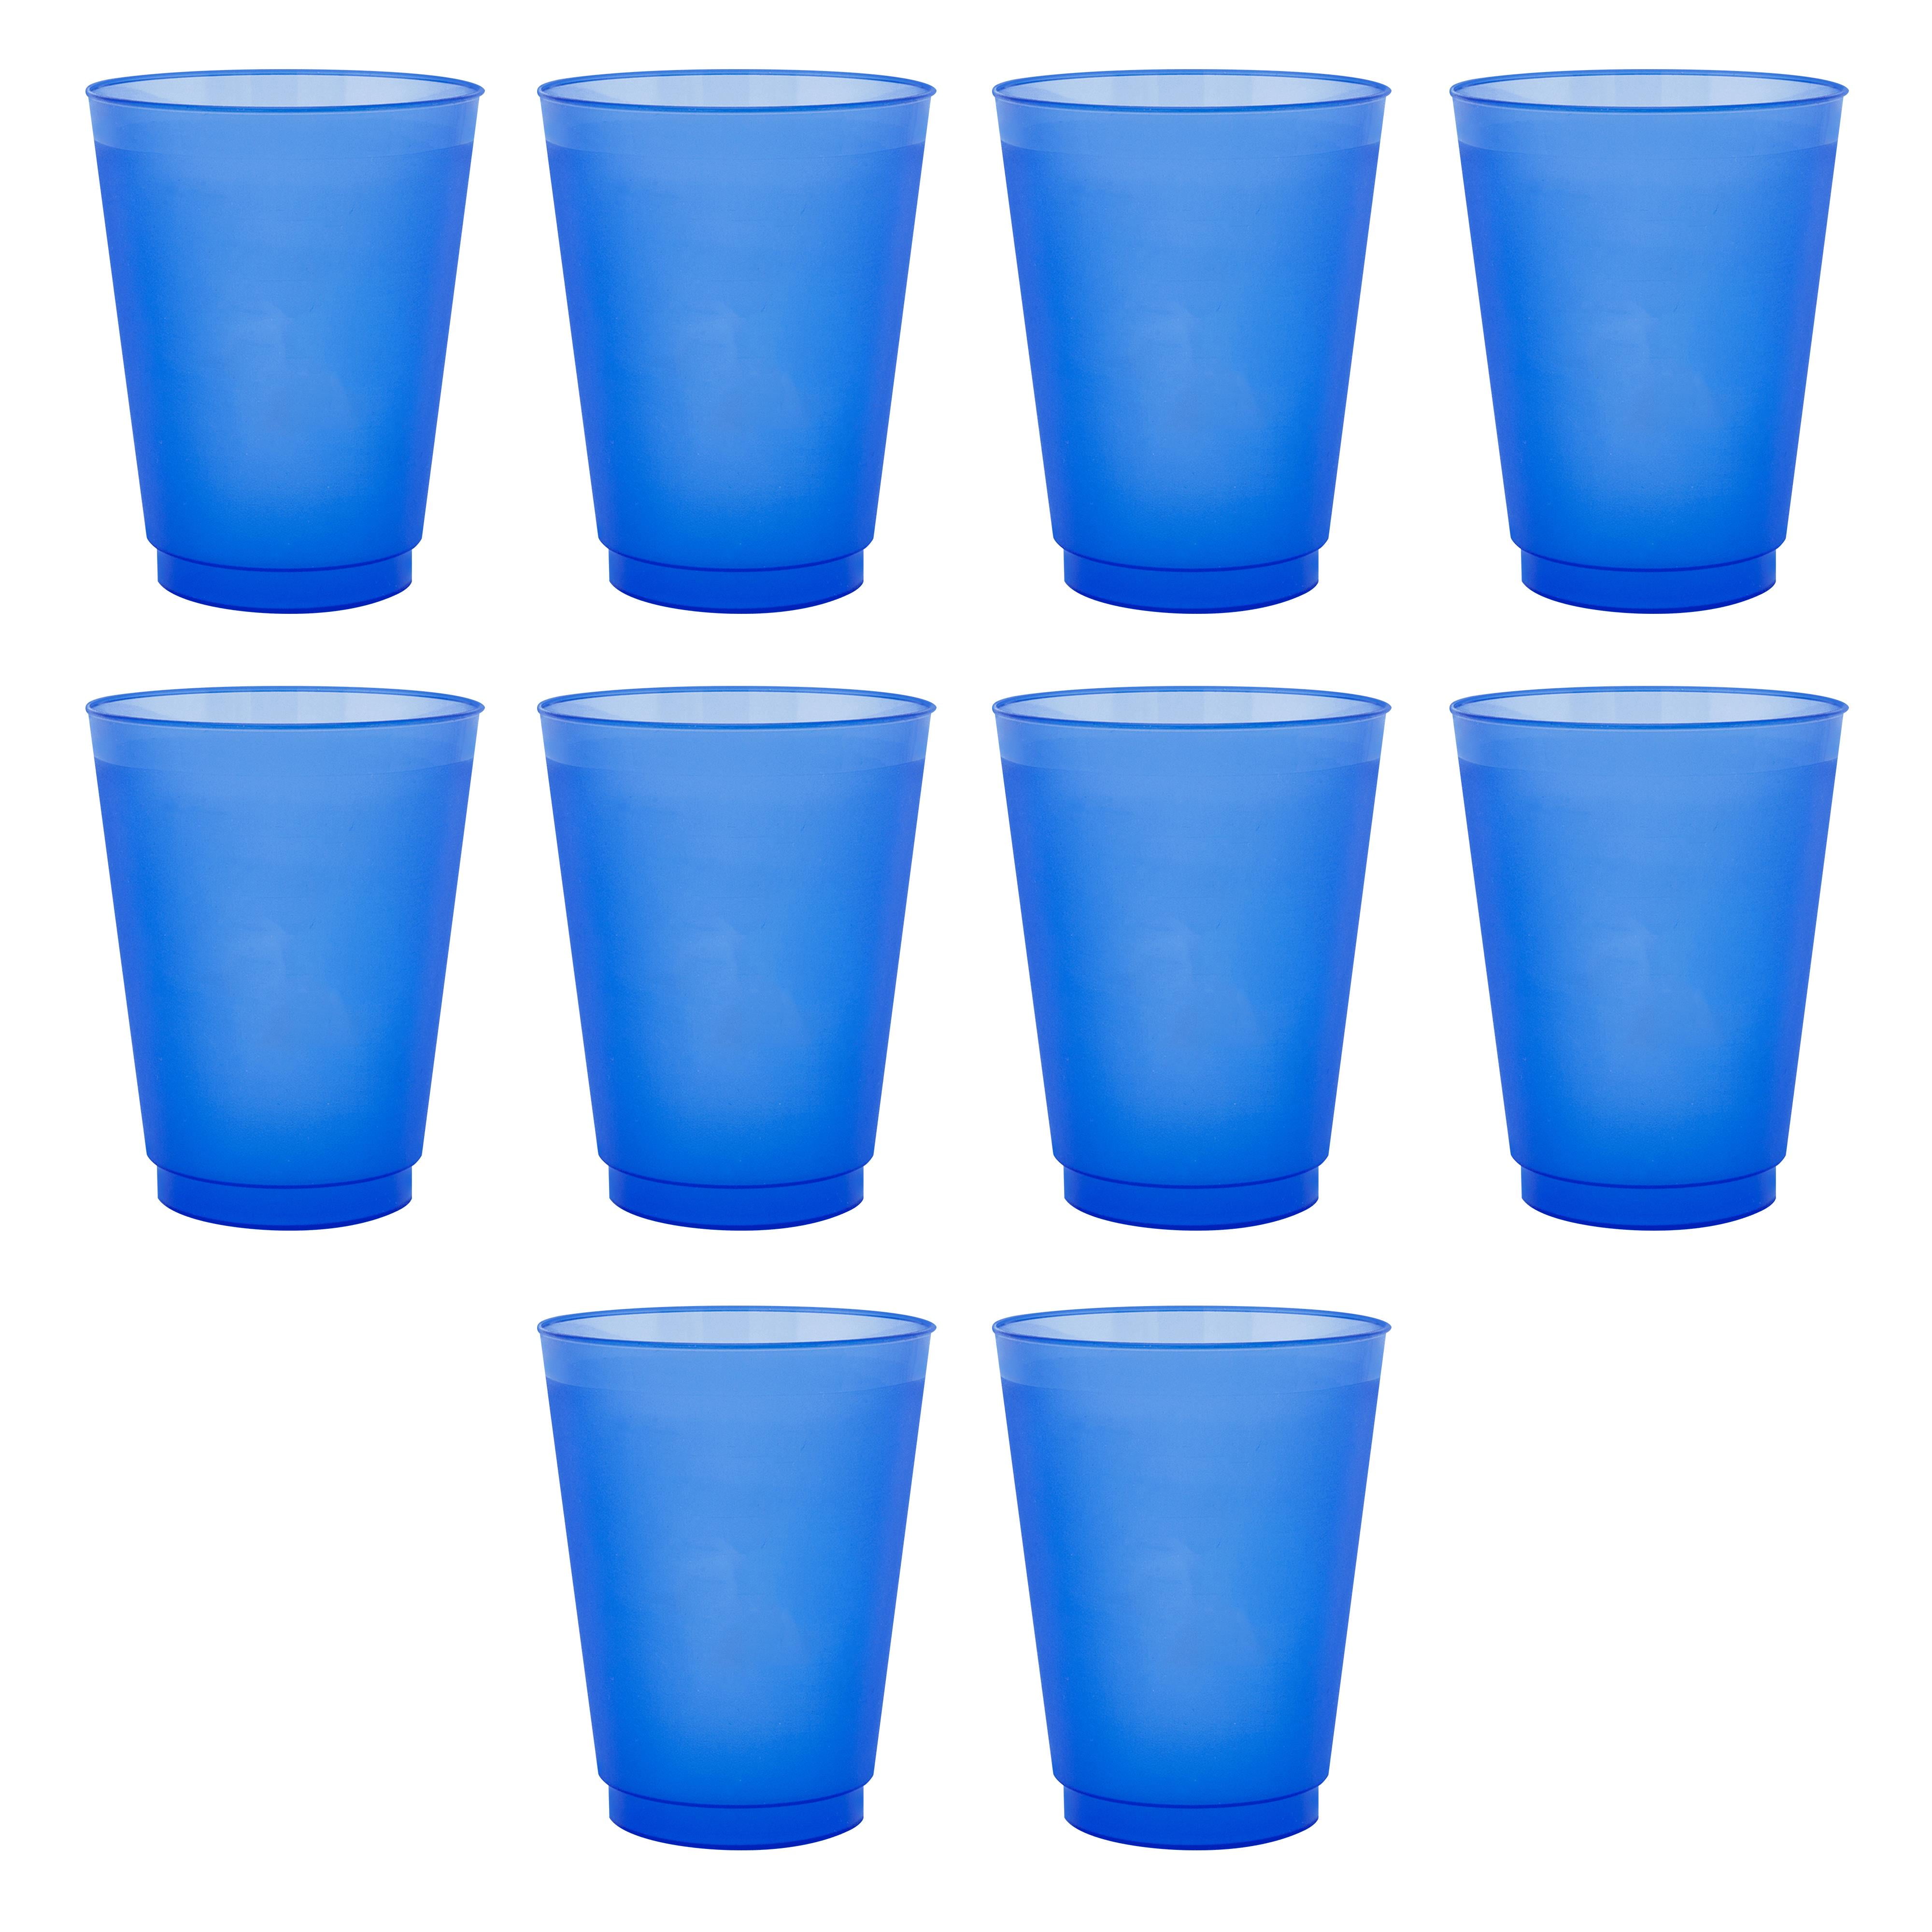 Frosted Plastic Stadium Cup 16 oz. Set of 10, Bulk Pack - Shatterproof,  Flexible, Reusable Party Cups - Blue 